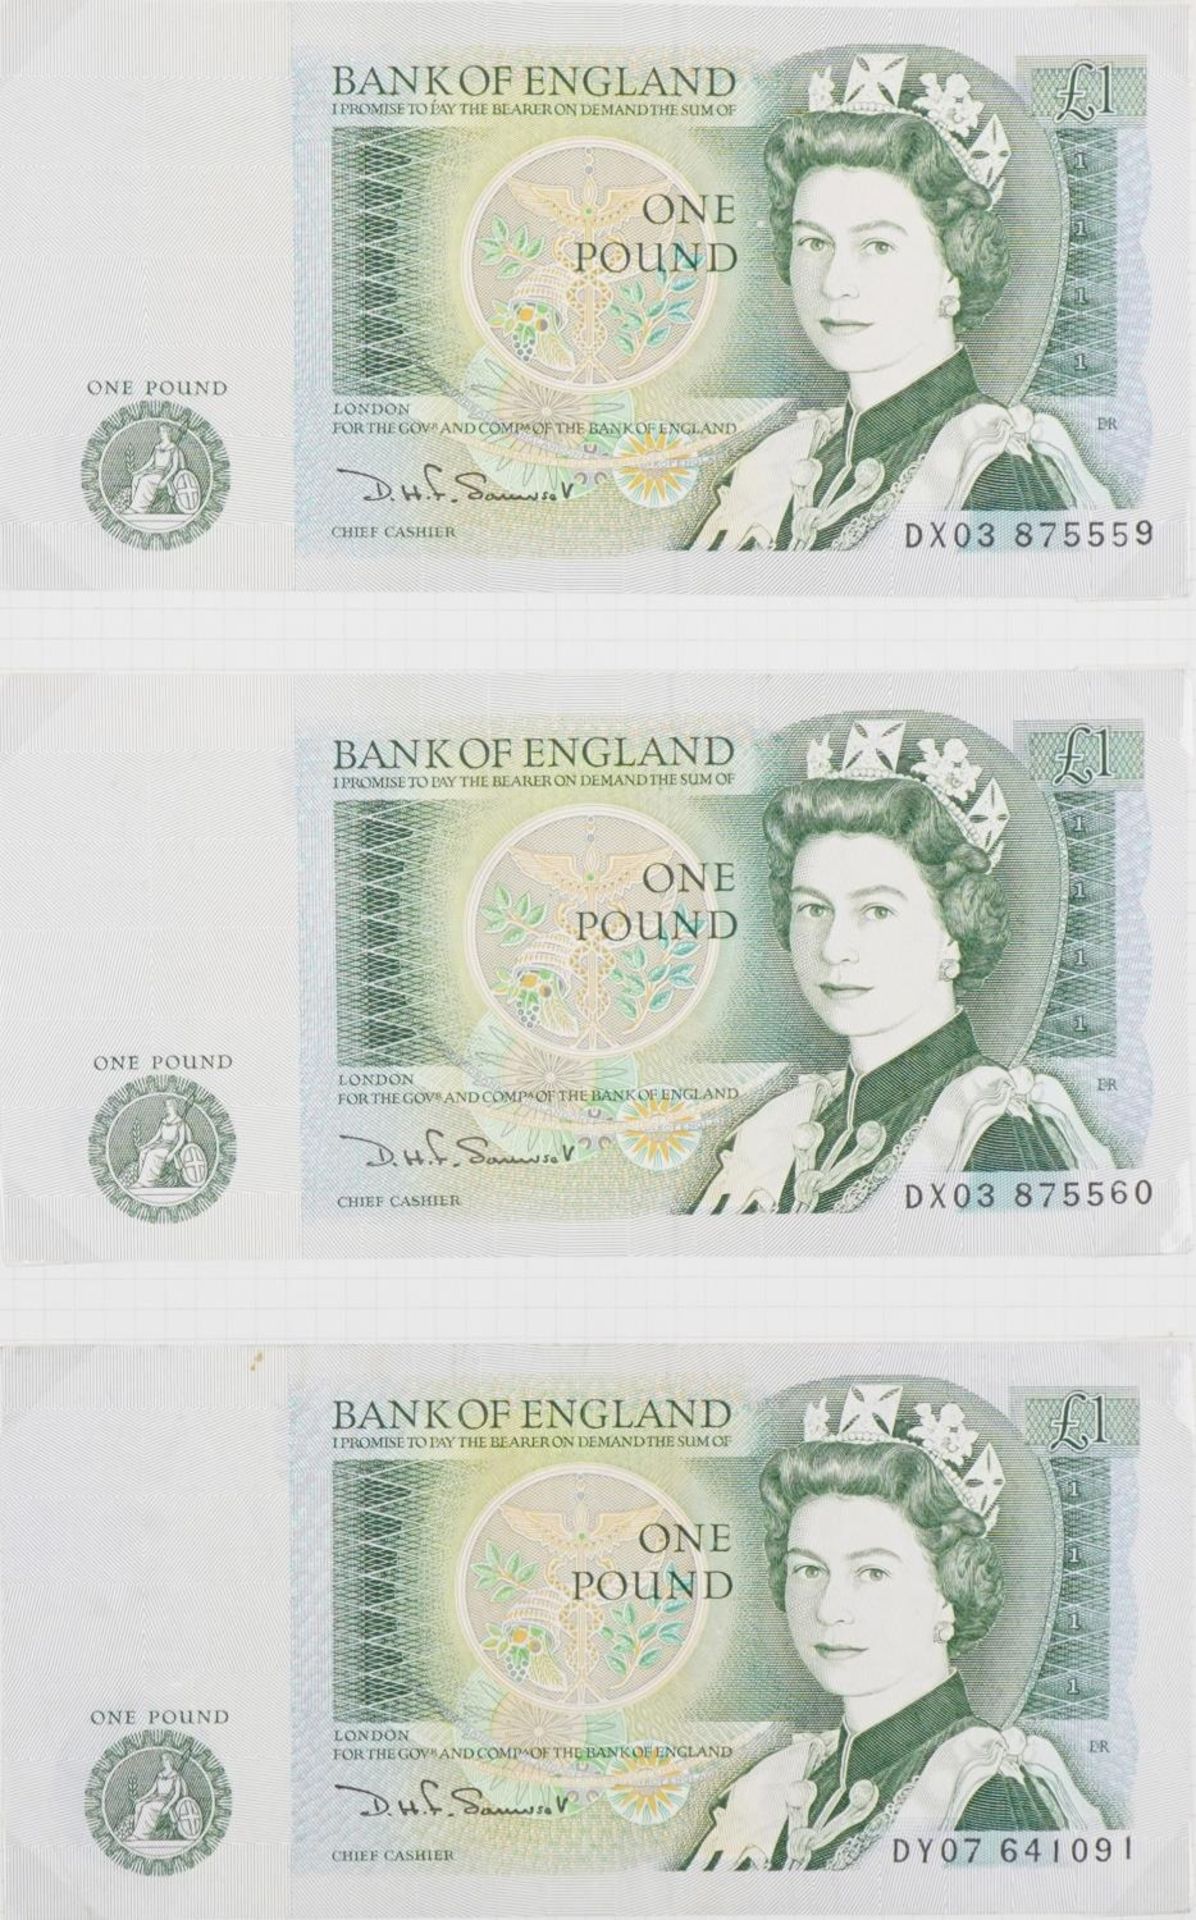 British and world banknotes arranged in an album including white five pound note, Chief Cashier P